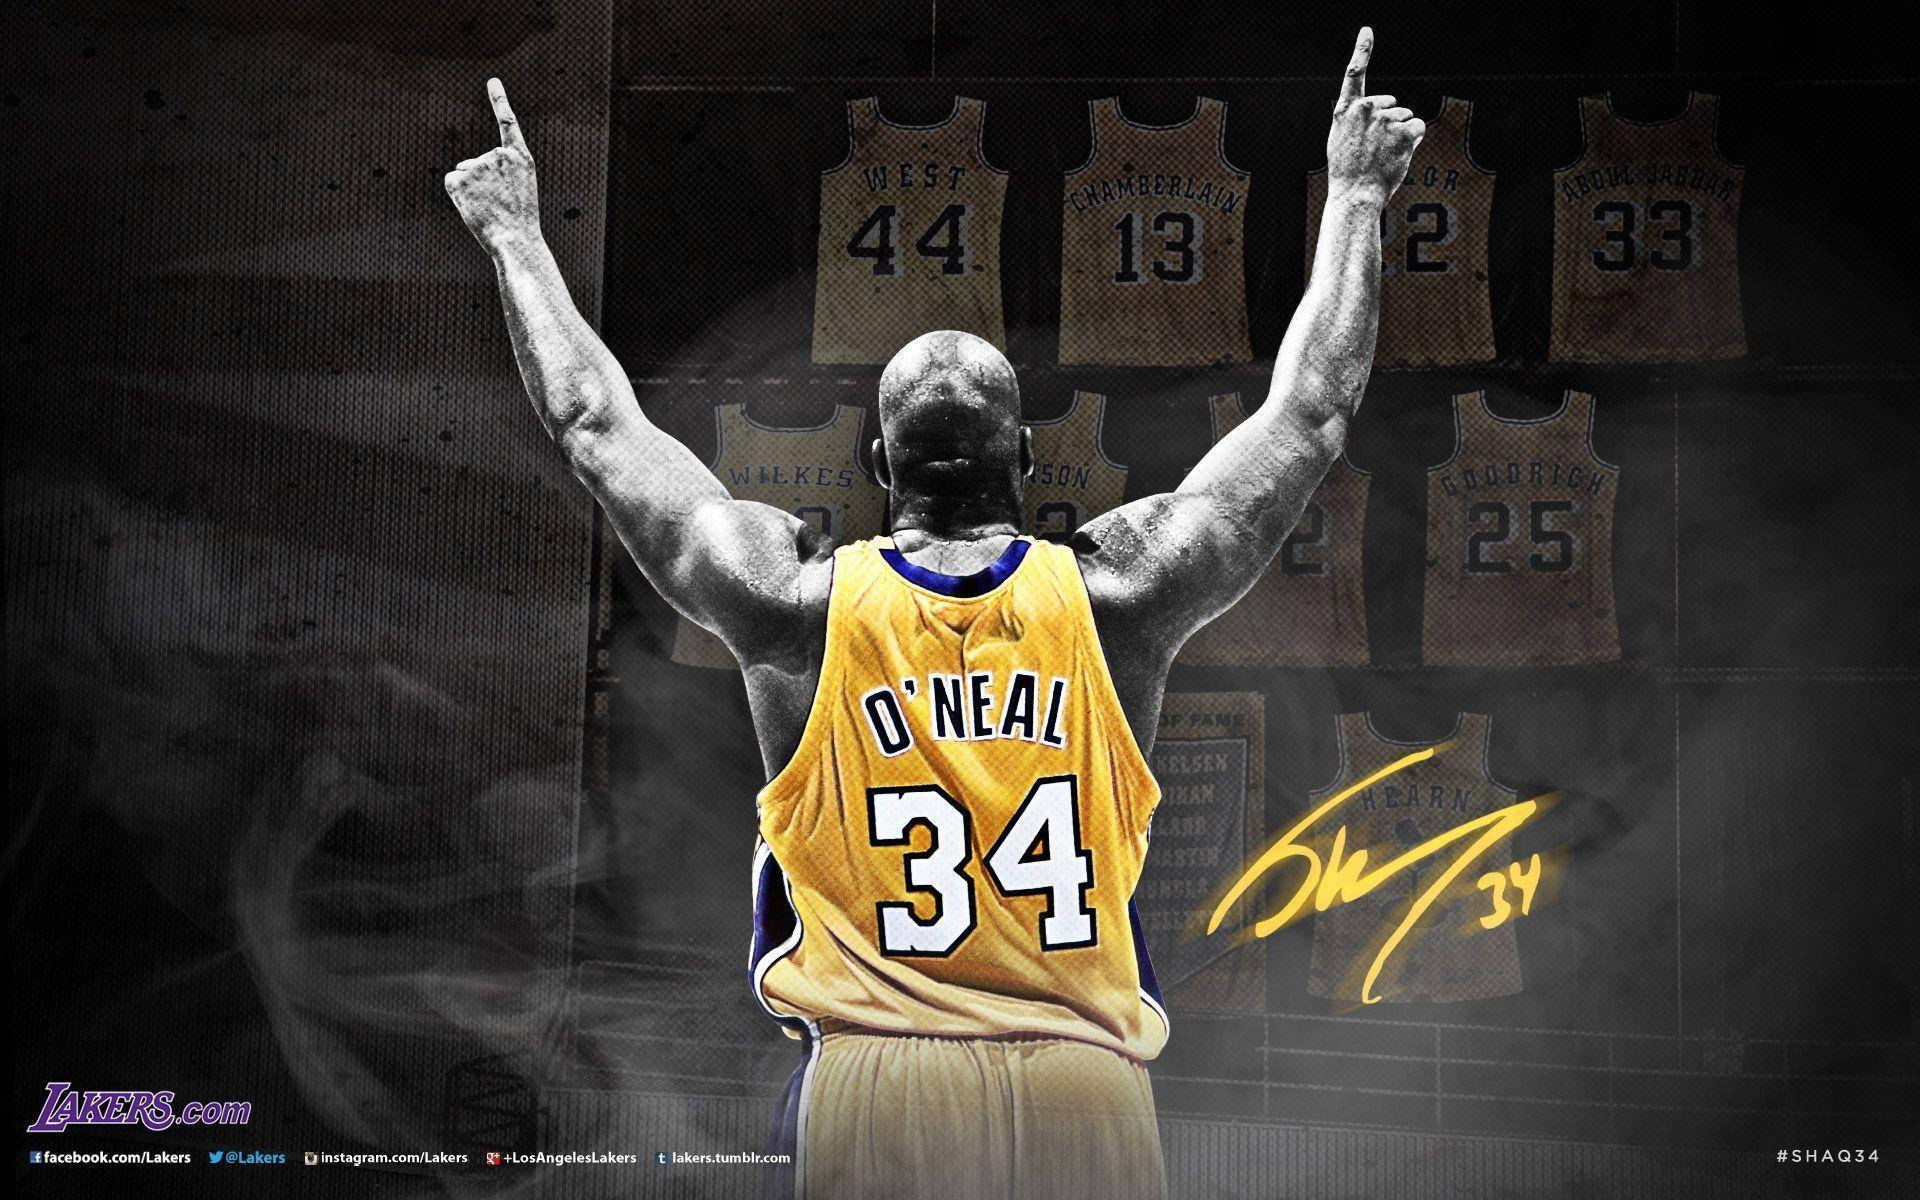 Shaquille O'neal Jersey Number Background